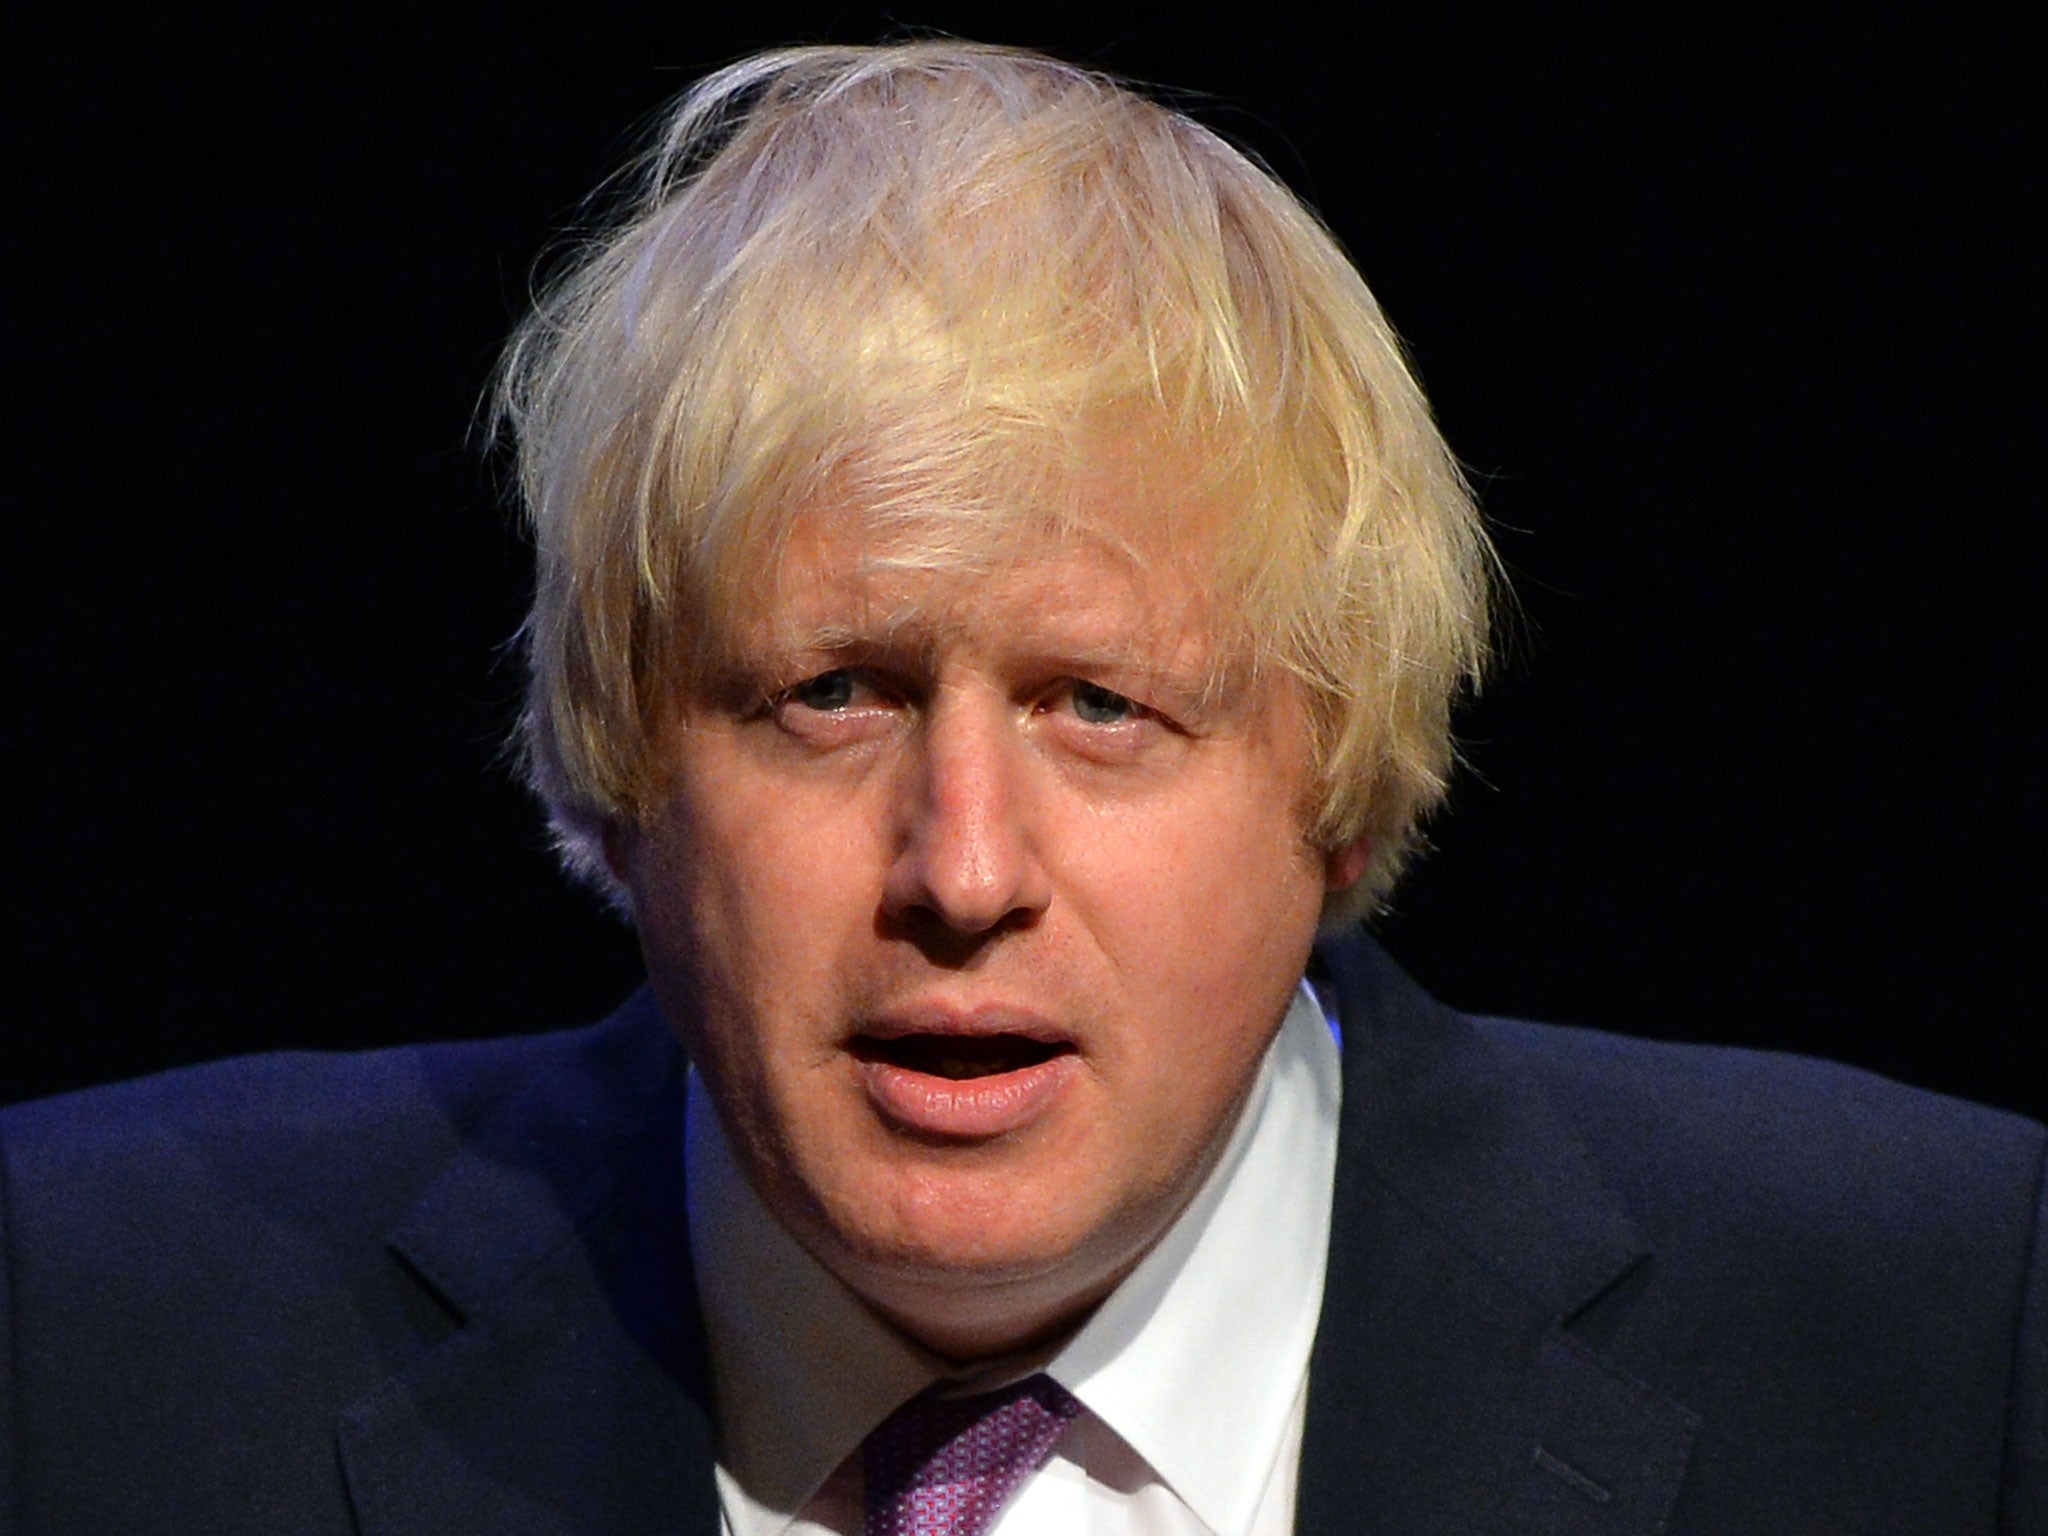 Boris Johnson is expected to back a report recommending Britain's exit from an unreformed EU